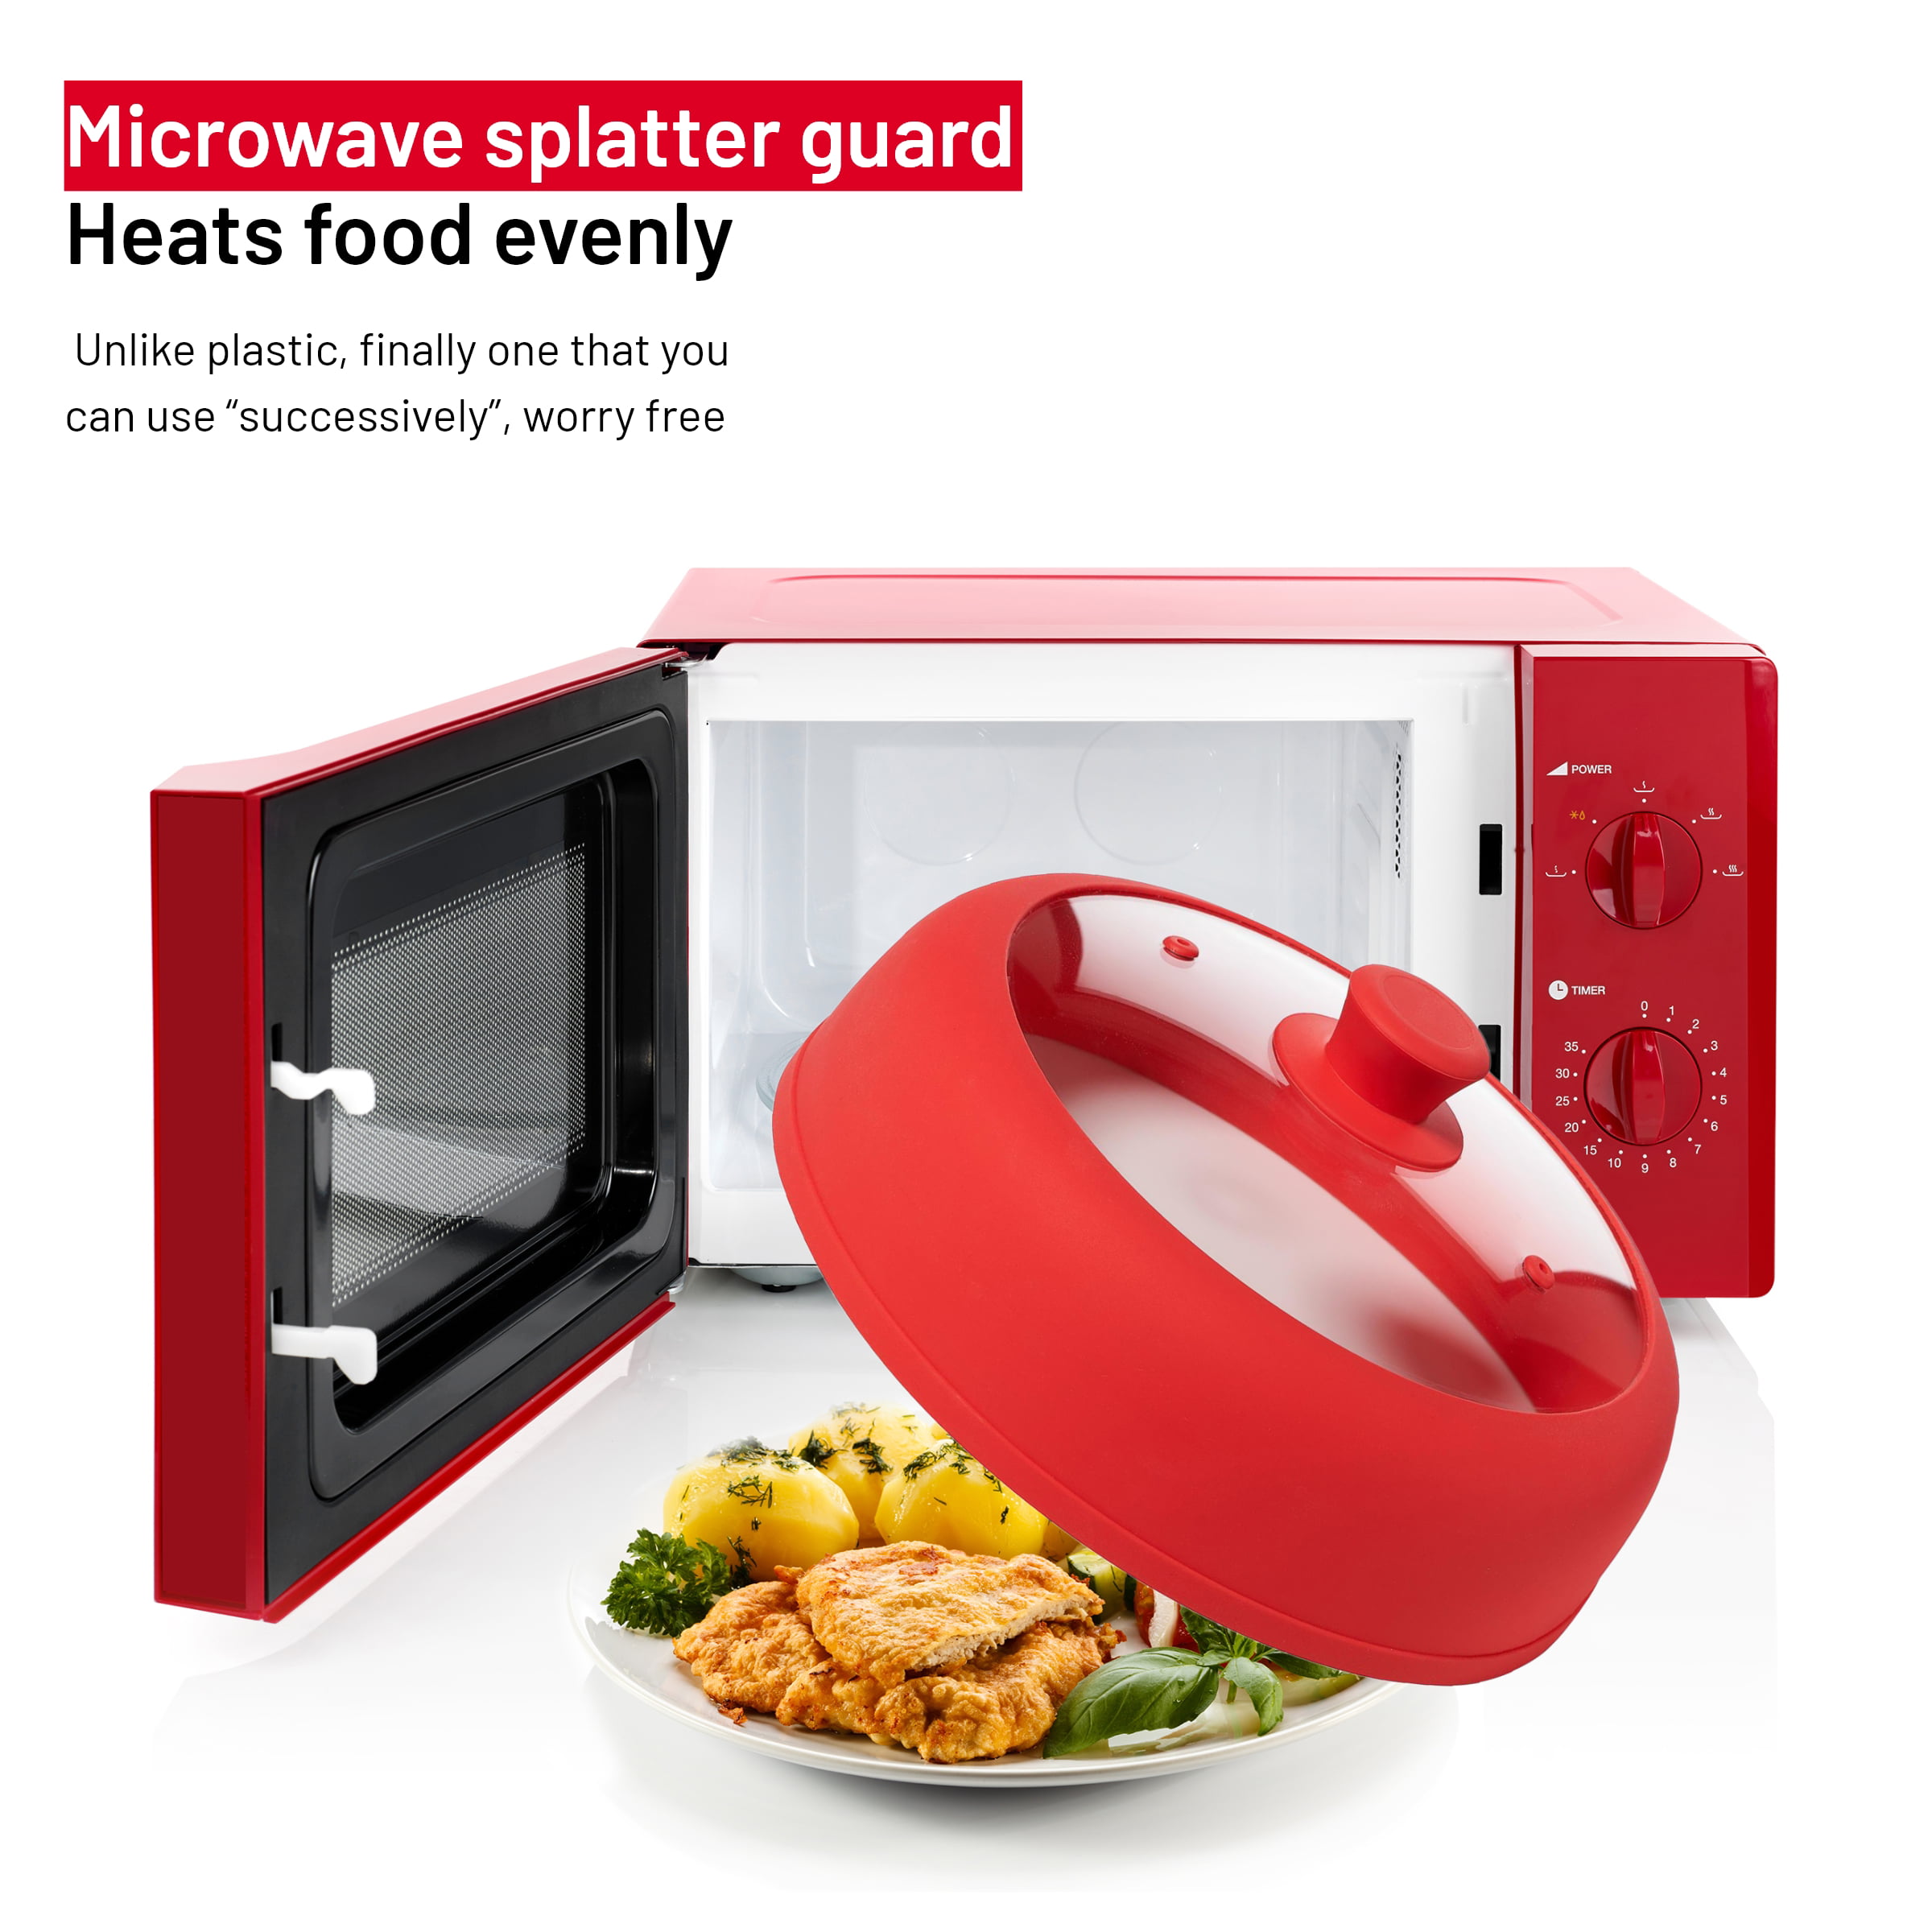 Tall Microwave Tempered Borosilicate Glass Plate Cover with Red Easy-Grip  Silicone Handle - Steam Food Without Venting - Microwave/Oven/Stove Safe 